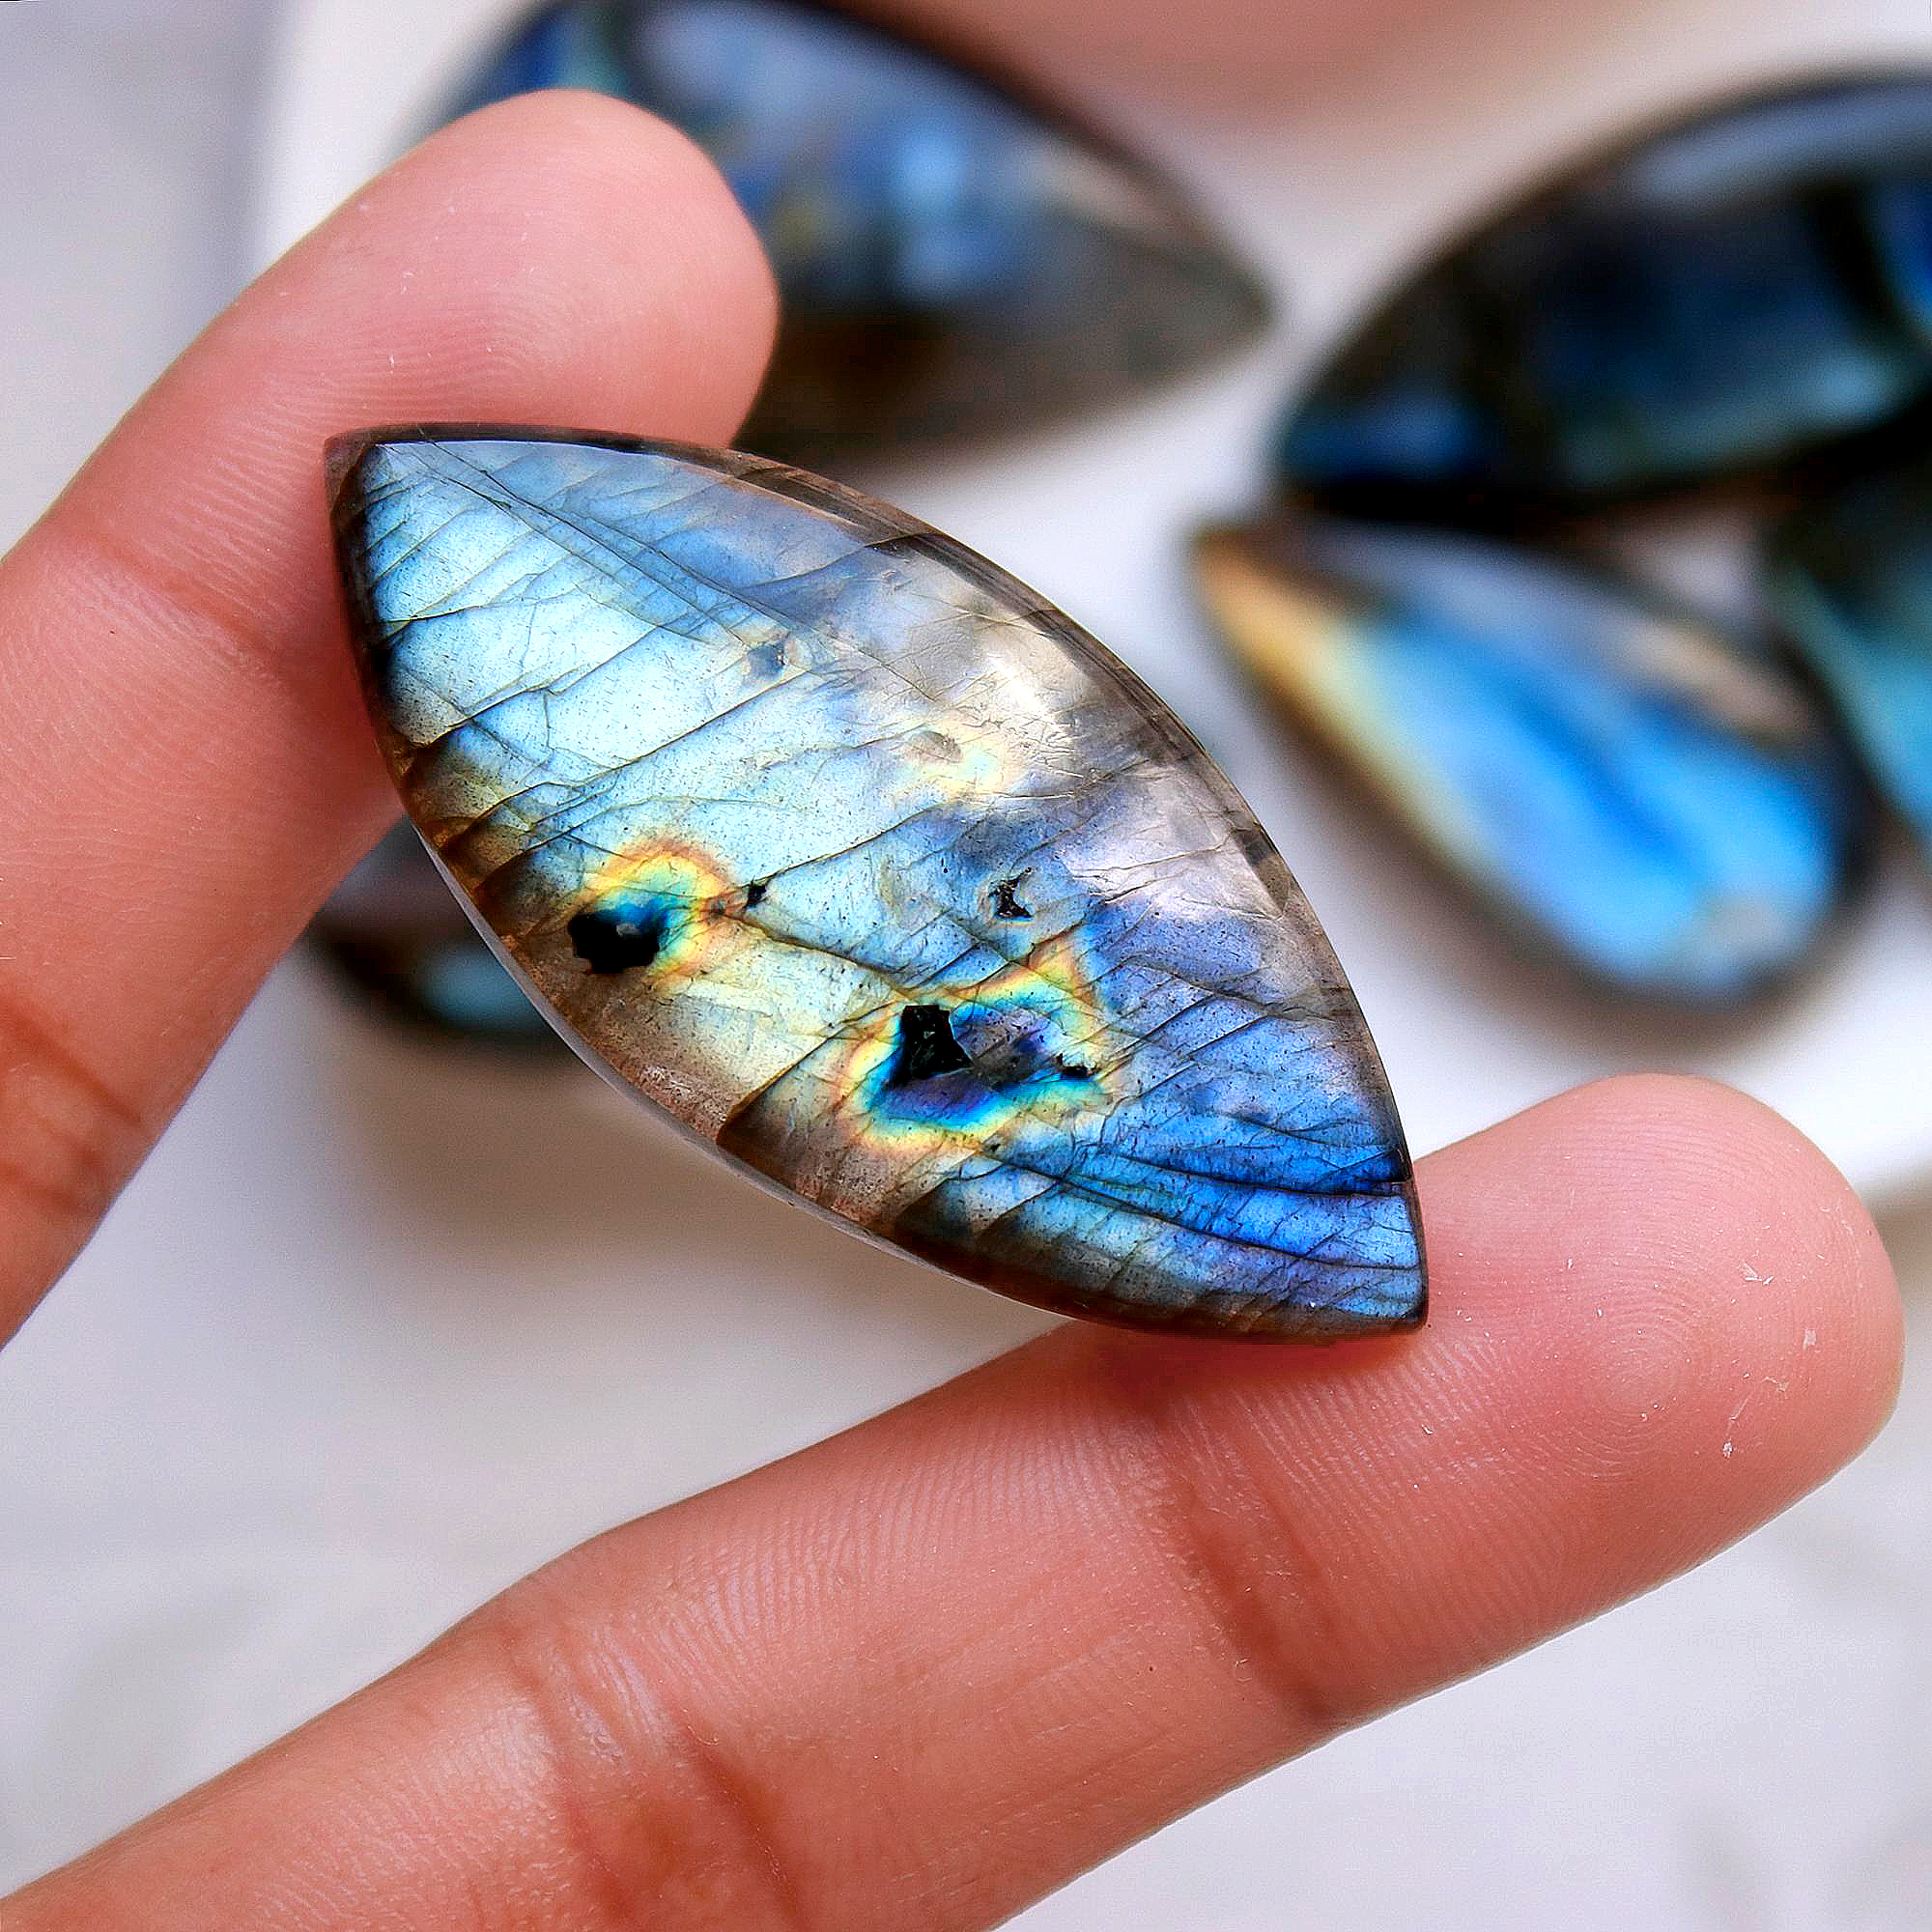 6 Pcs268Cts Natural Multifire Labradorite Loose Cabochon Gemstone Lot Both Side Polished For Jewelry Making 47x22 31x20mm#1106